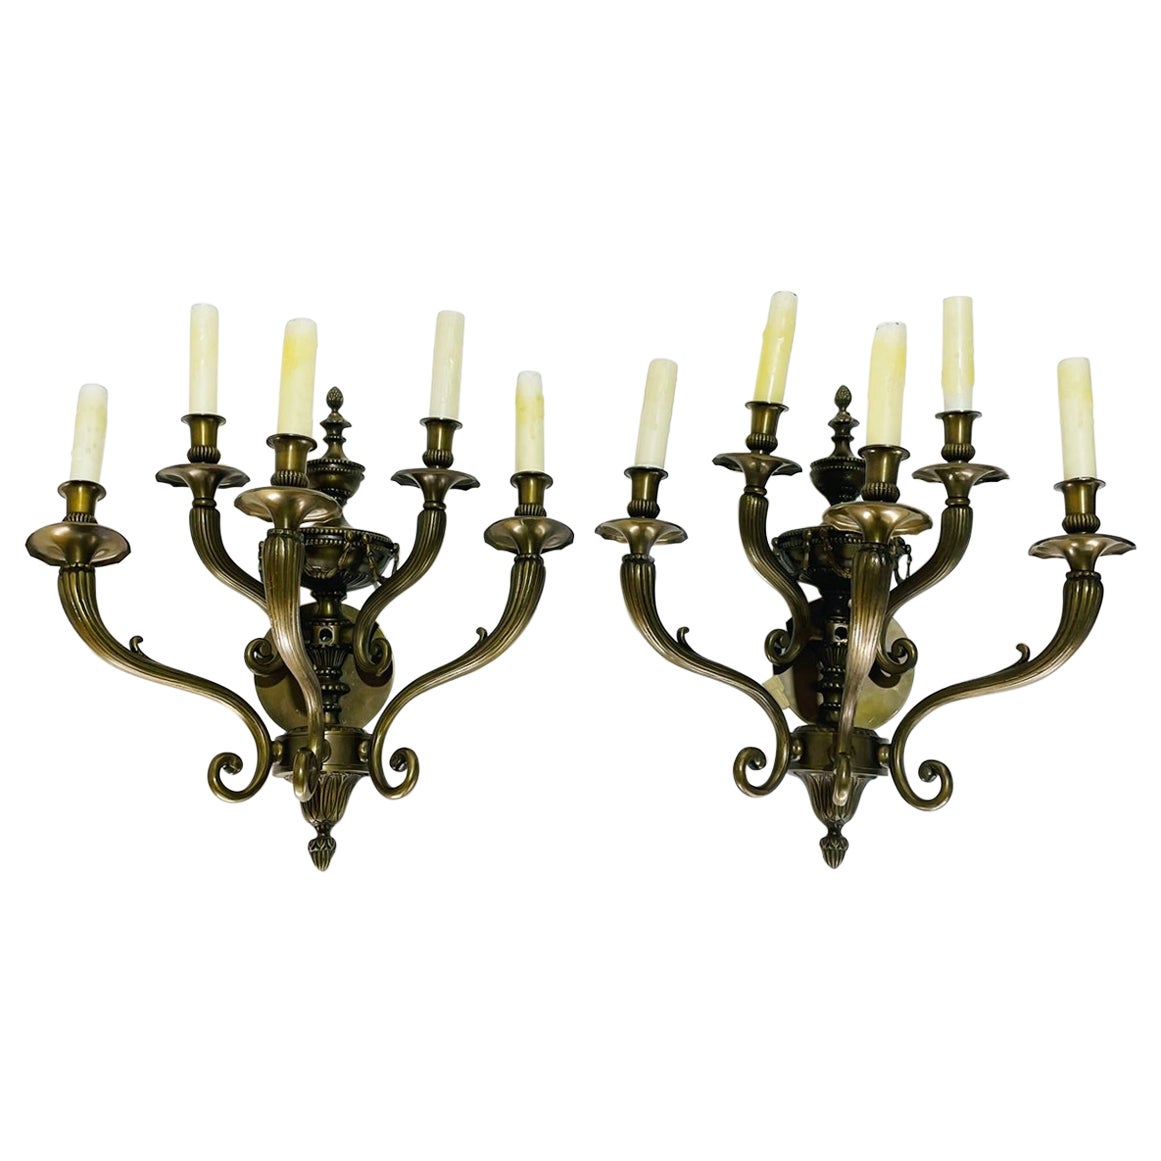 Pair of Neoclassical Style Wall Sconces in Solid Bronze